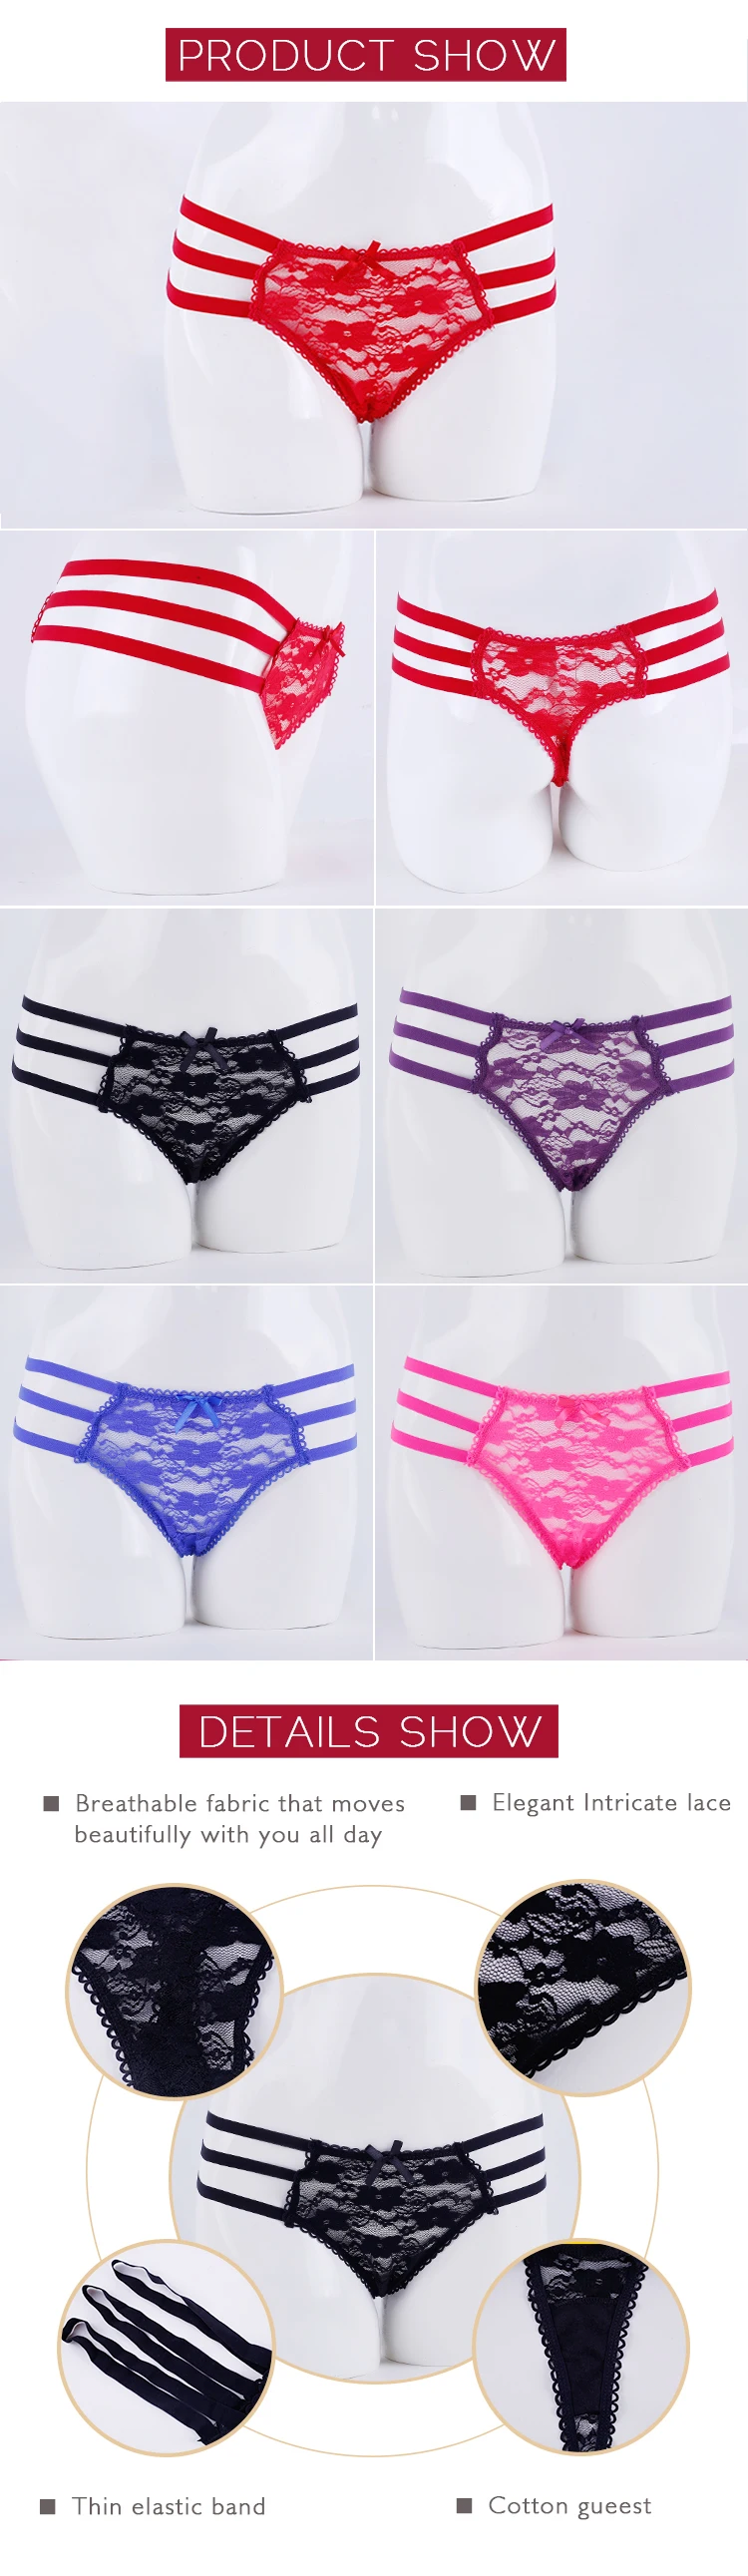 Hot selling Sexy Women Fancy G string Transparent panty Lace Lingerie Thong